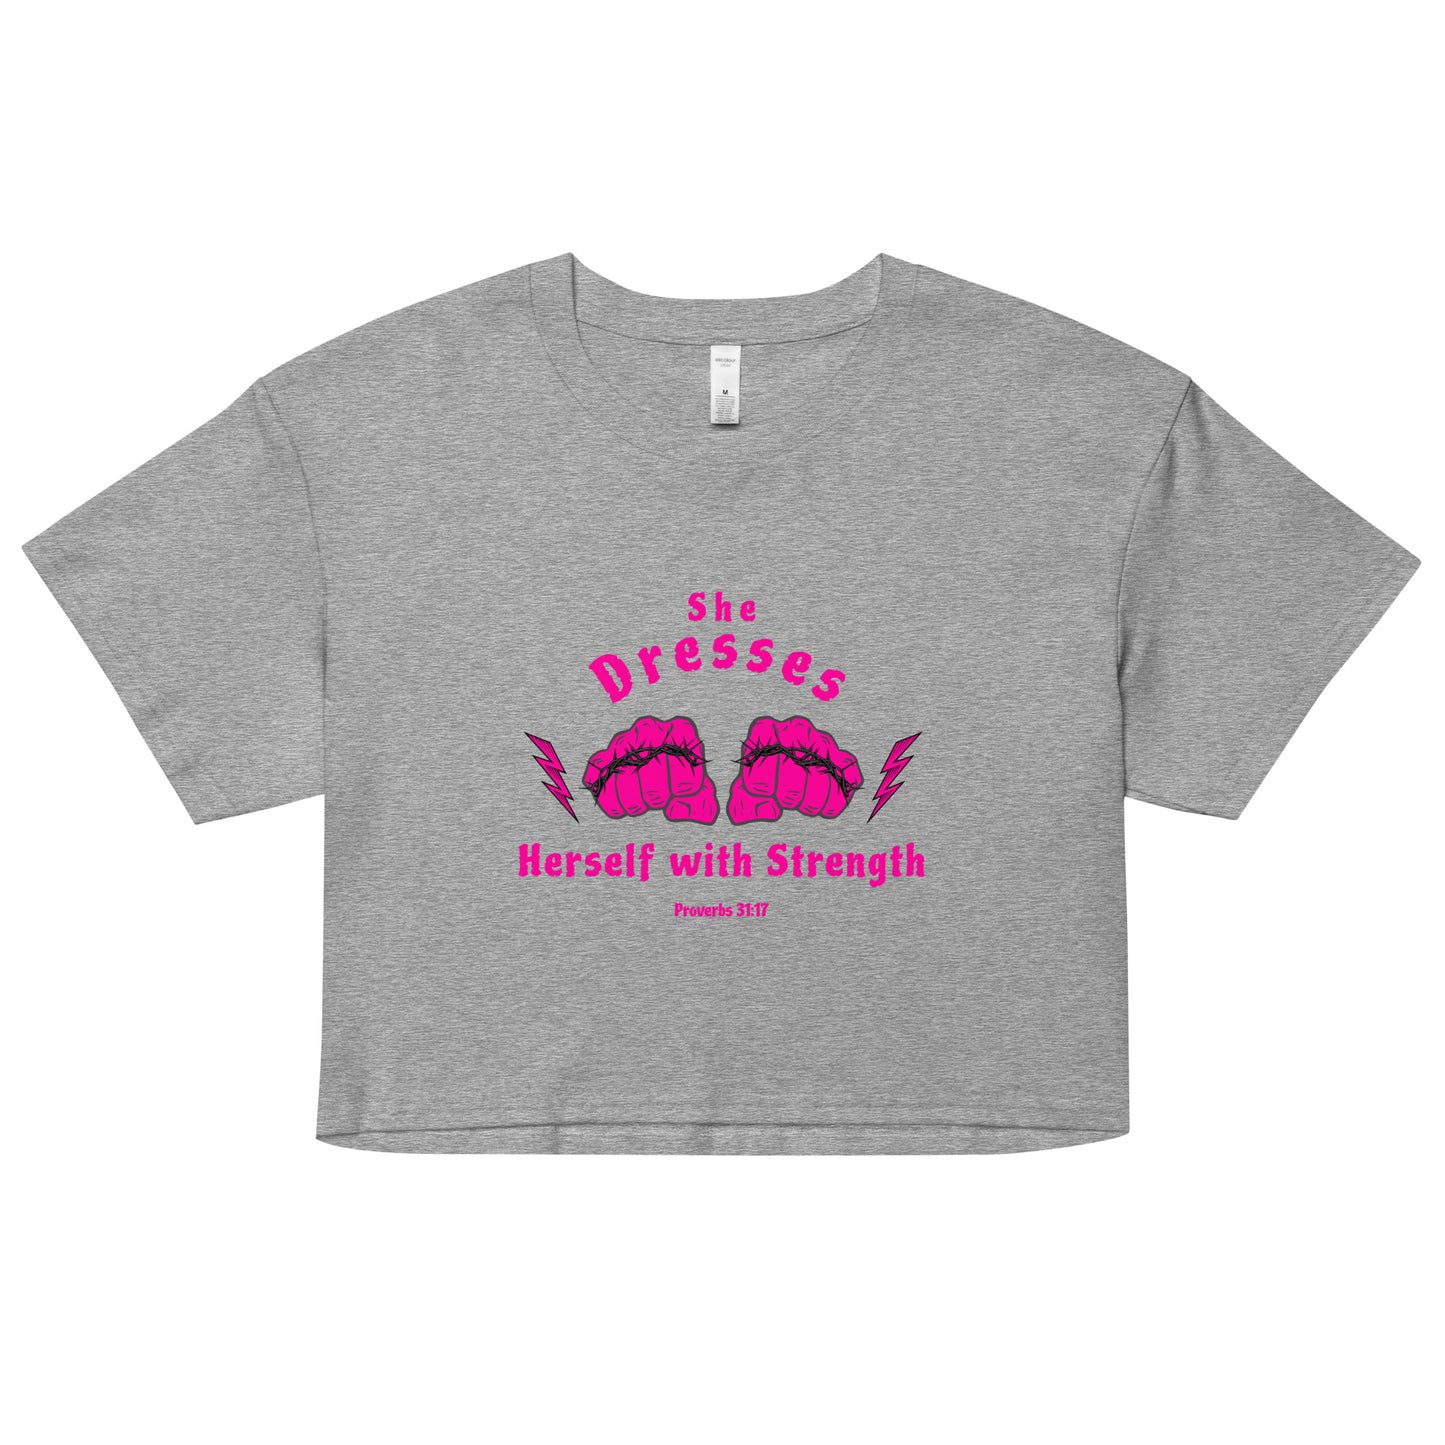 She Dresses Herself with Strength Women’s crop top